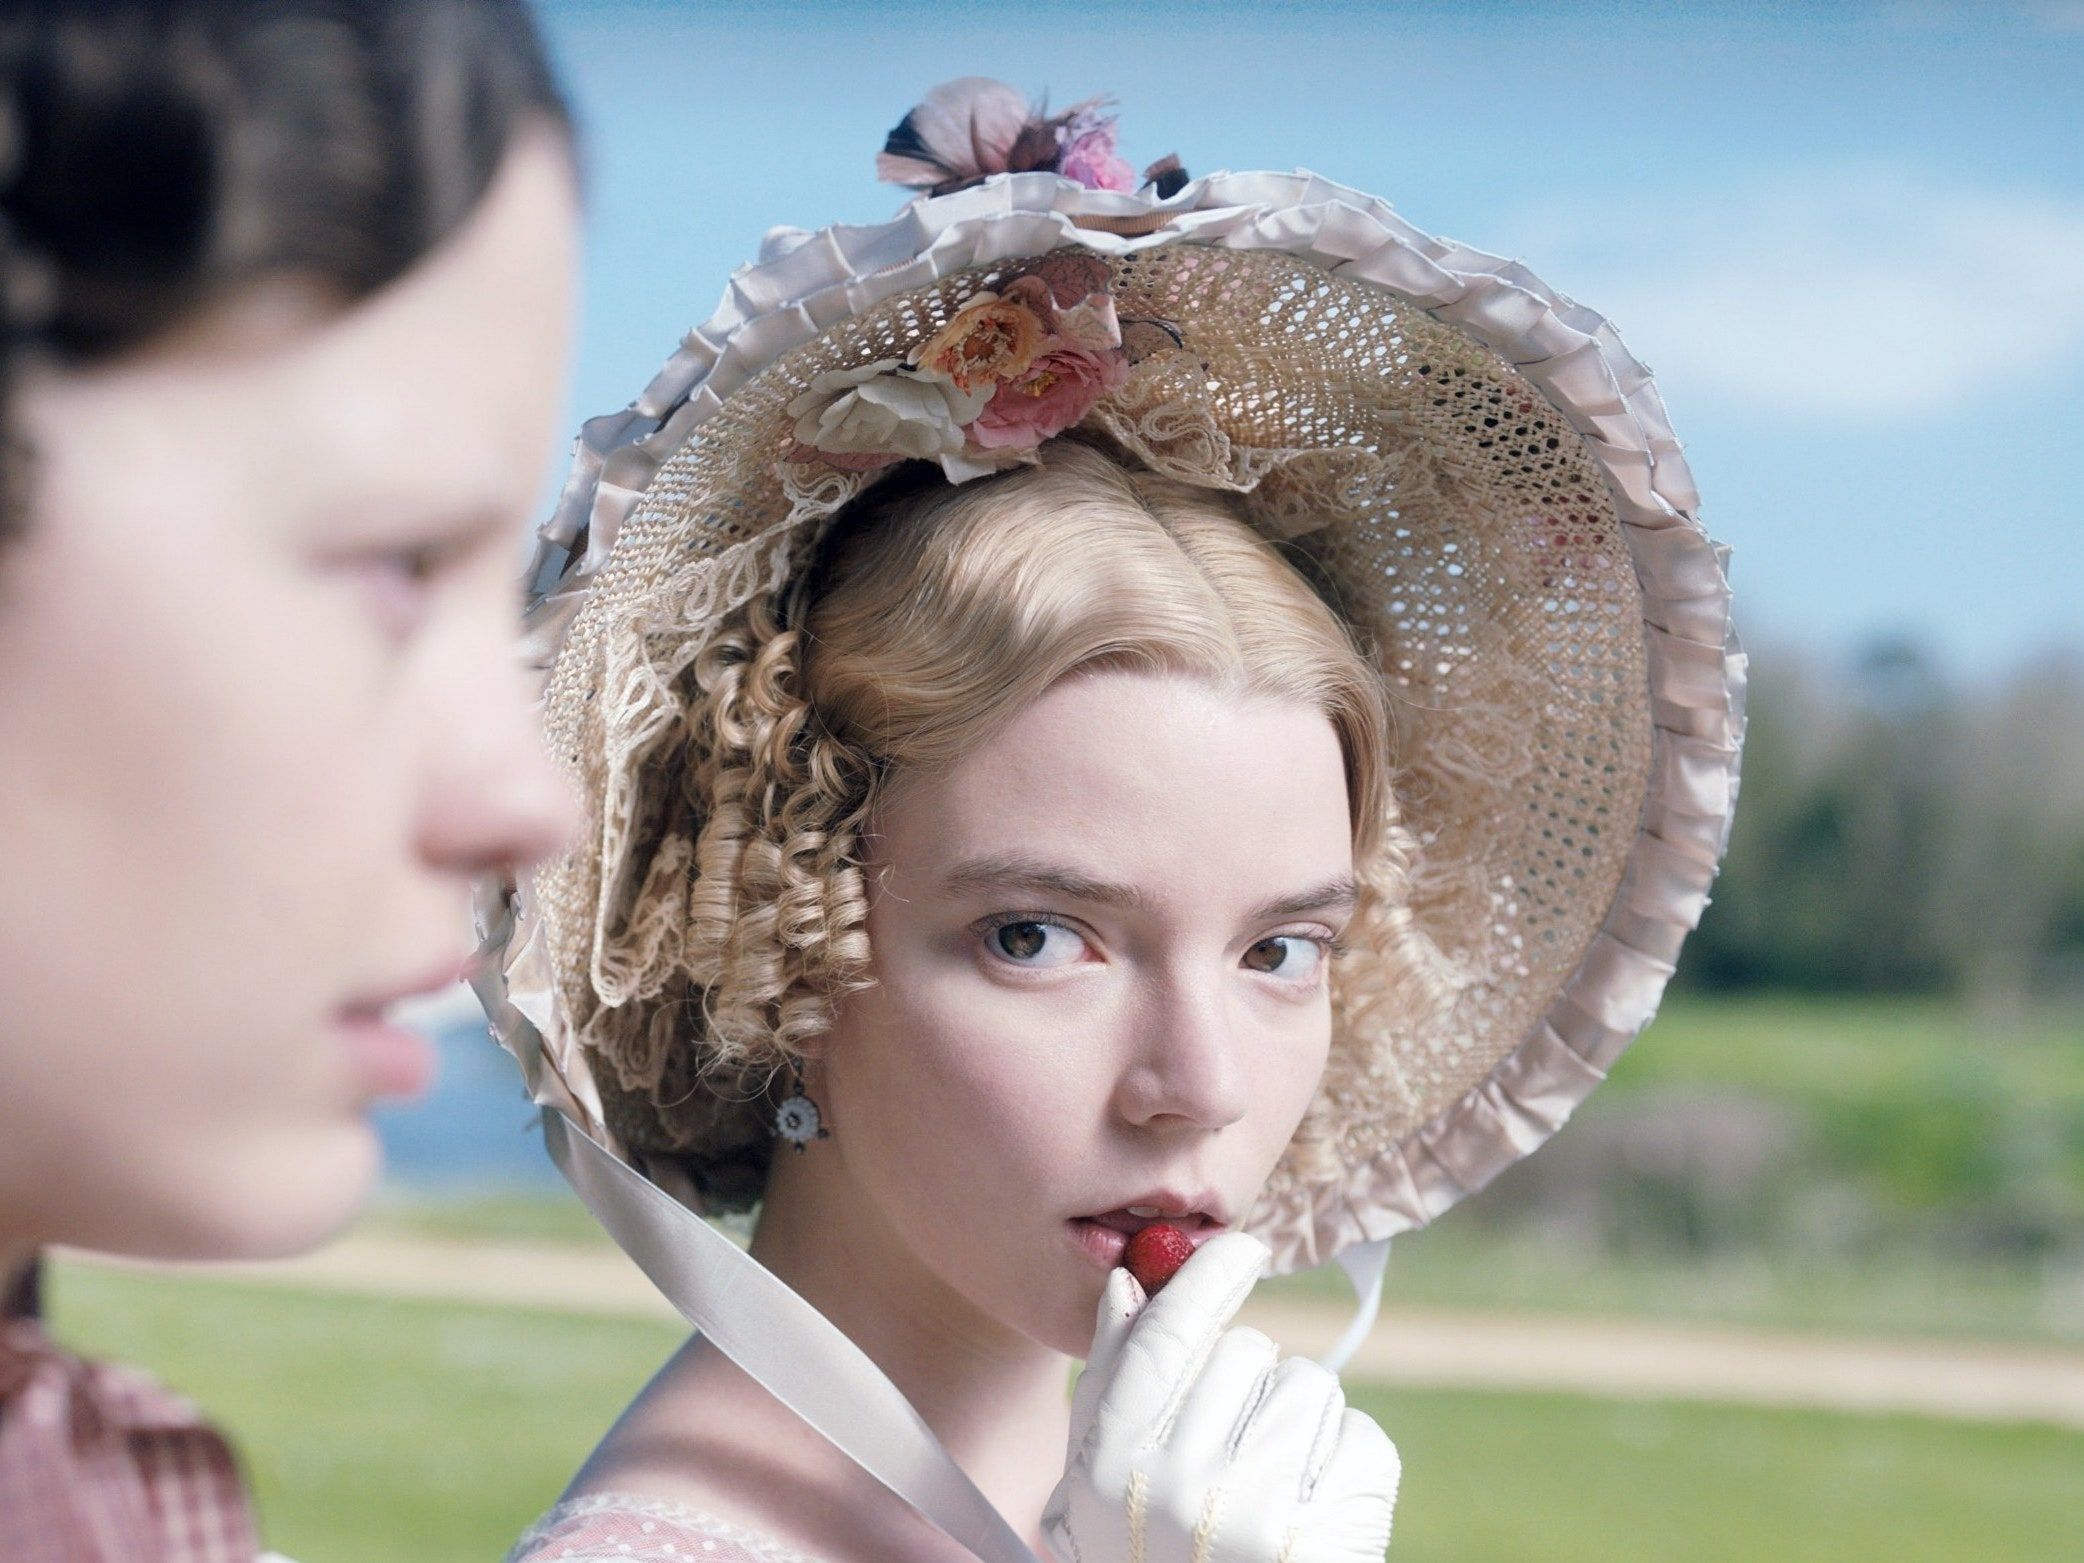 Mia Wasikowska as Jane Eyre, wearing a bonnet and holding a strawberry to her mouth - Anya Taylor-Joy